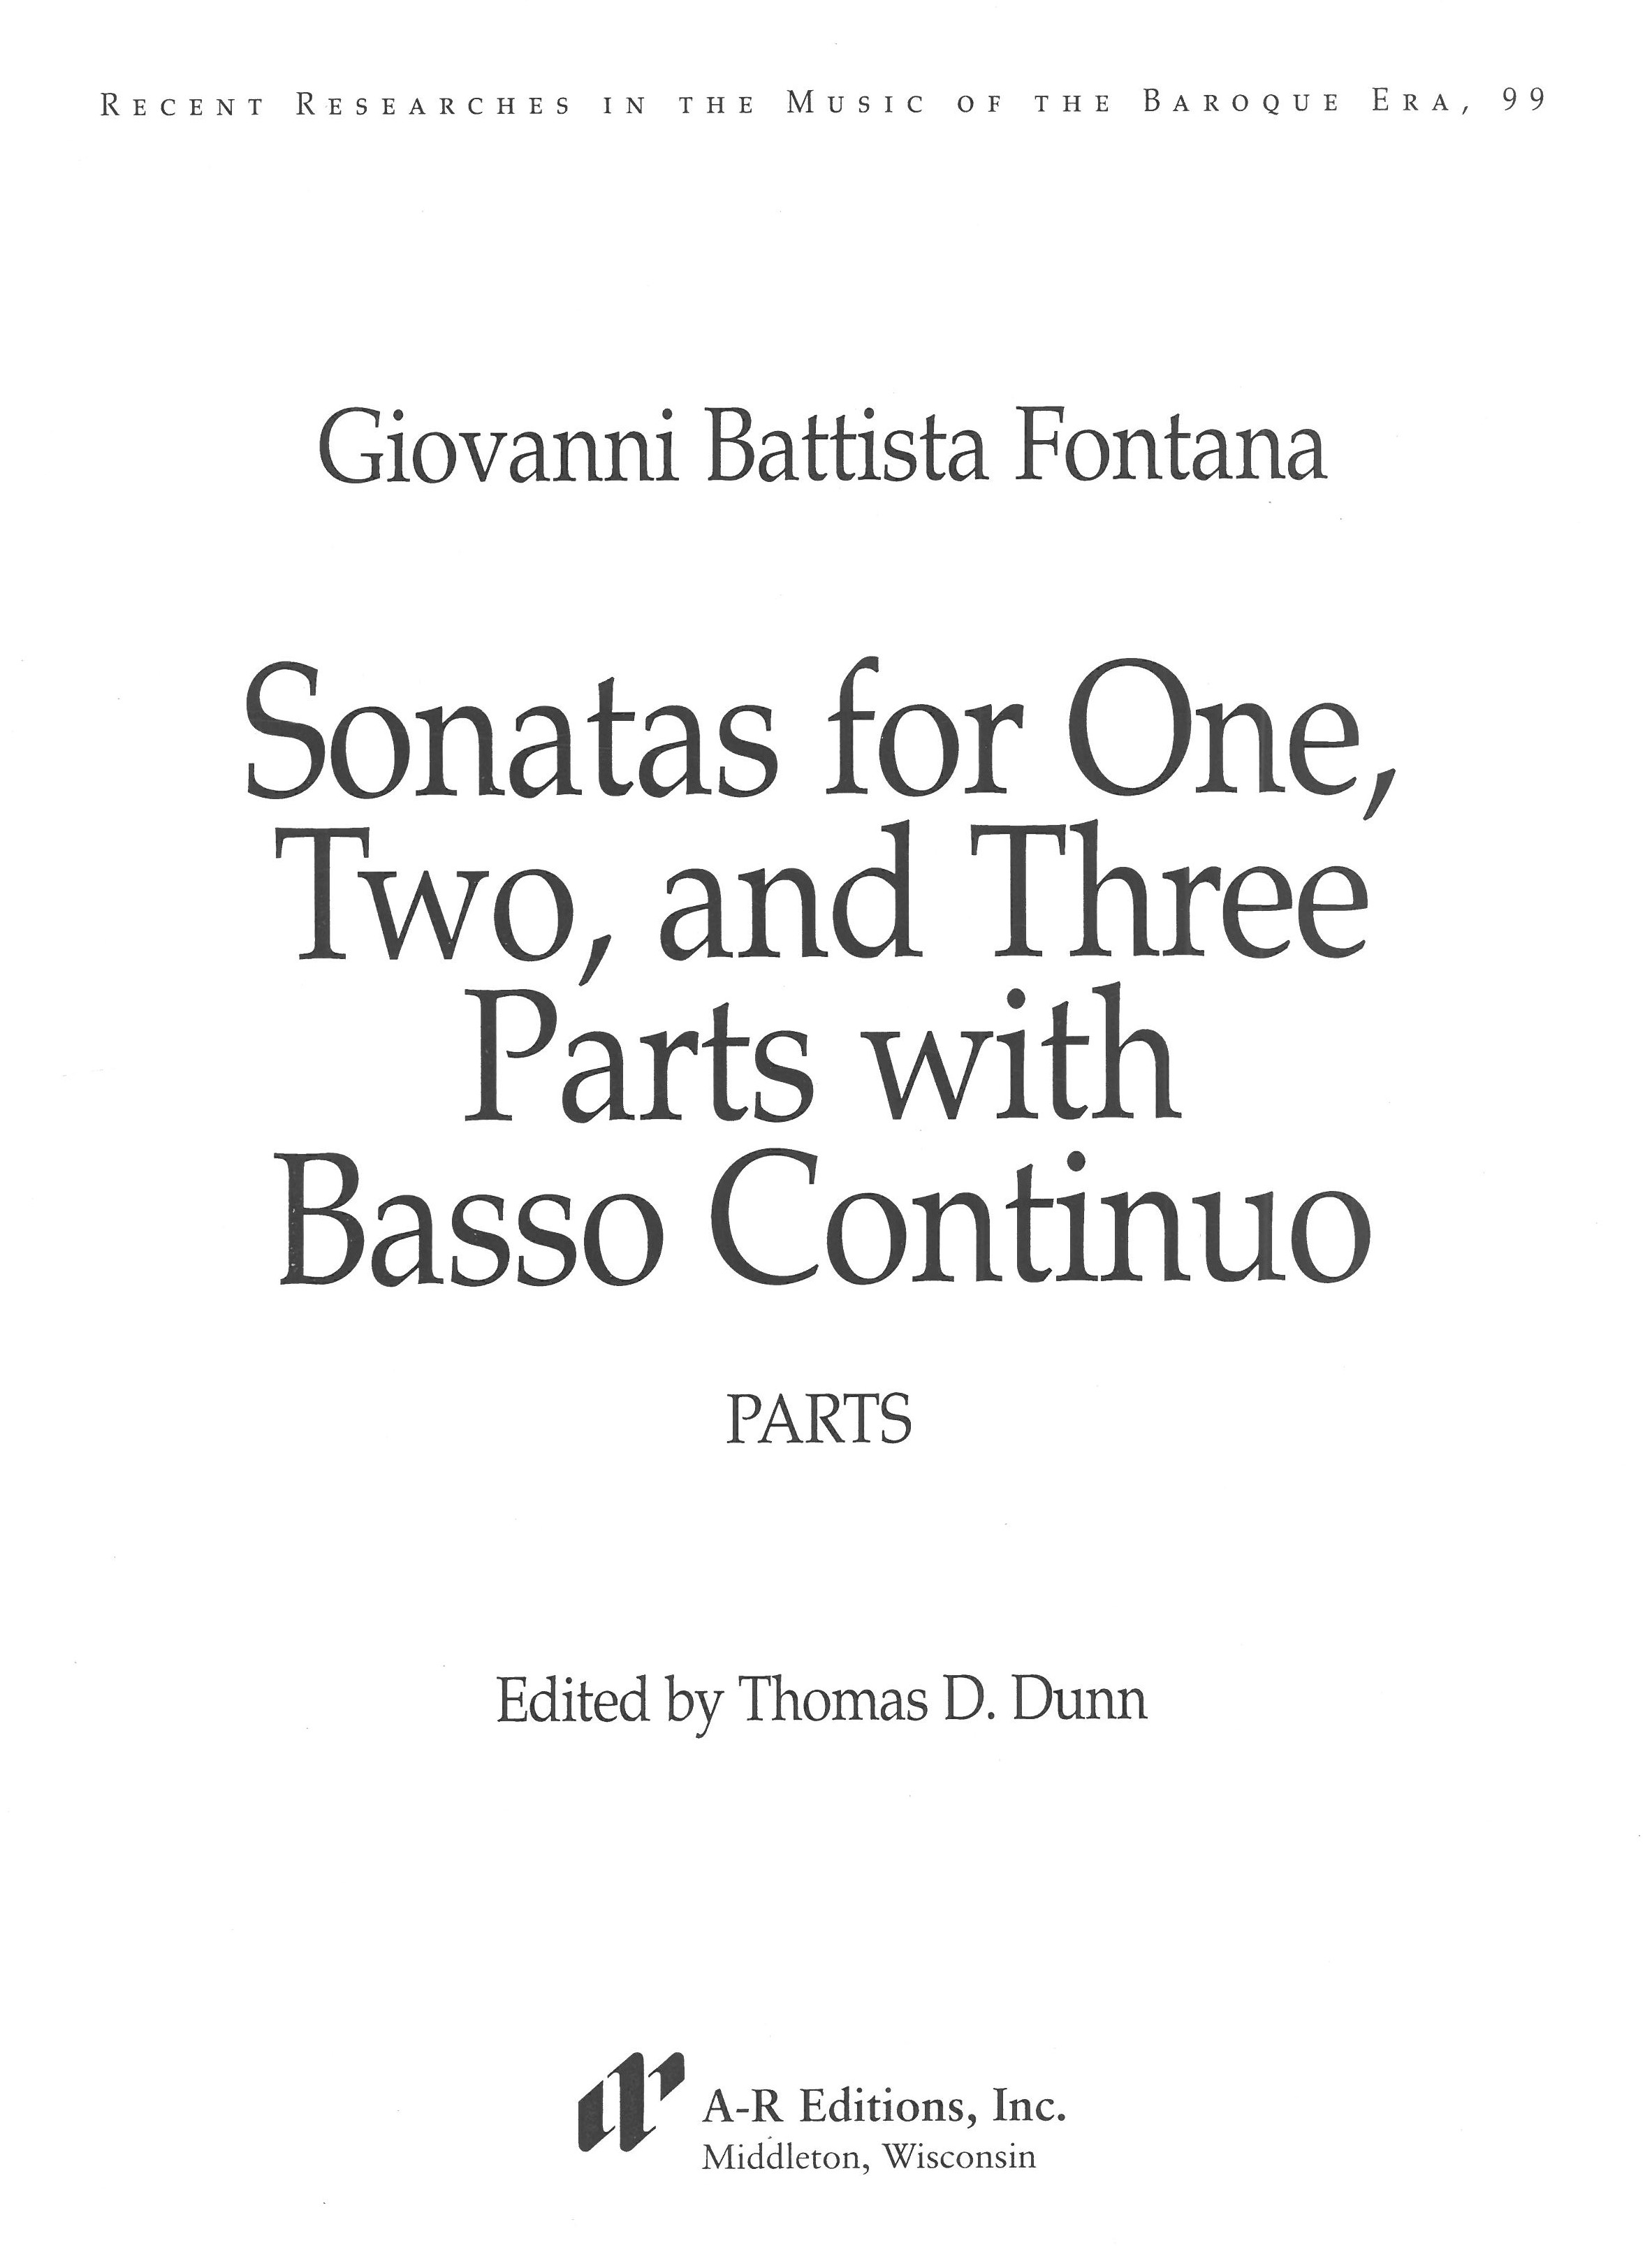 Sonatas For One, Two, and Three Parts With Basso Continuo.